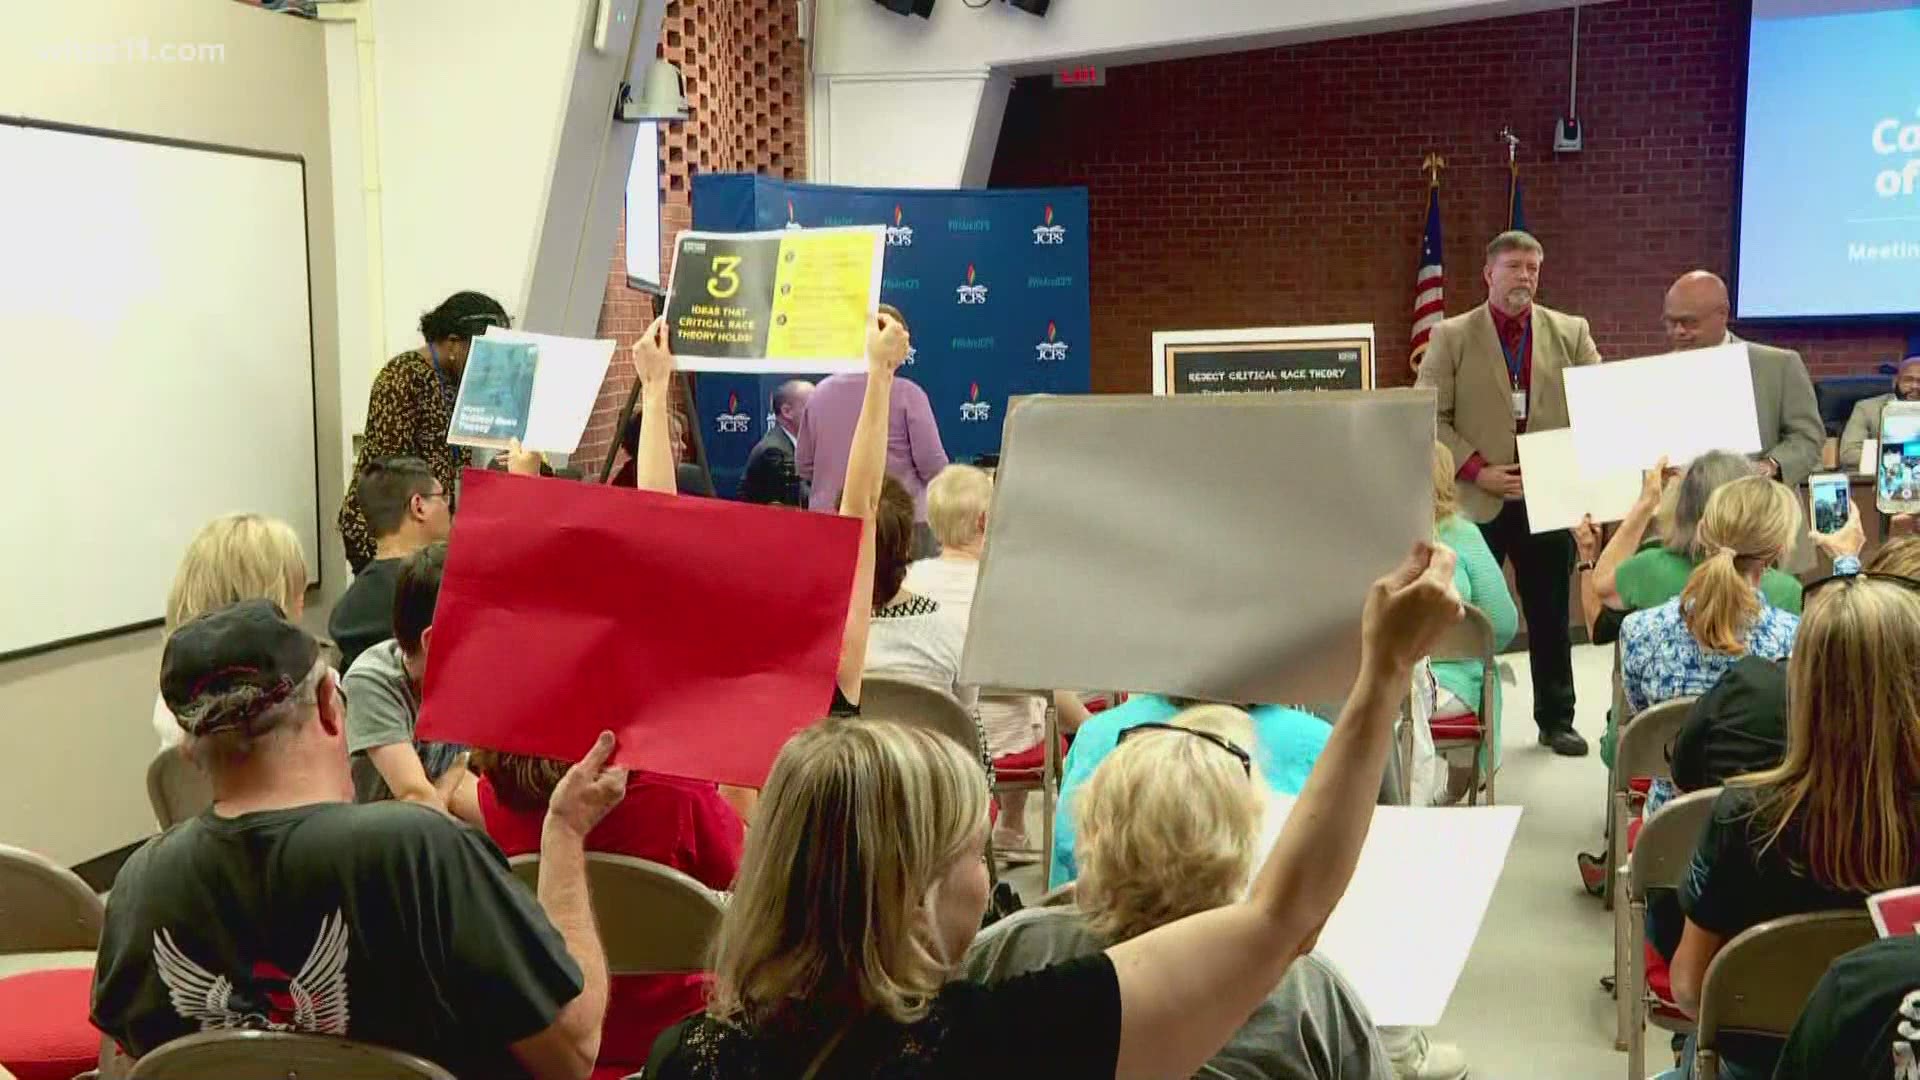 Even though critical race theory isn't taught in the district, a group disrupted Tuesday night's meeting voicing their opposition.